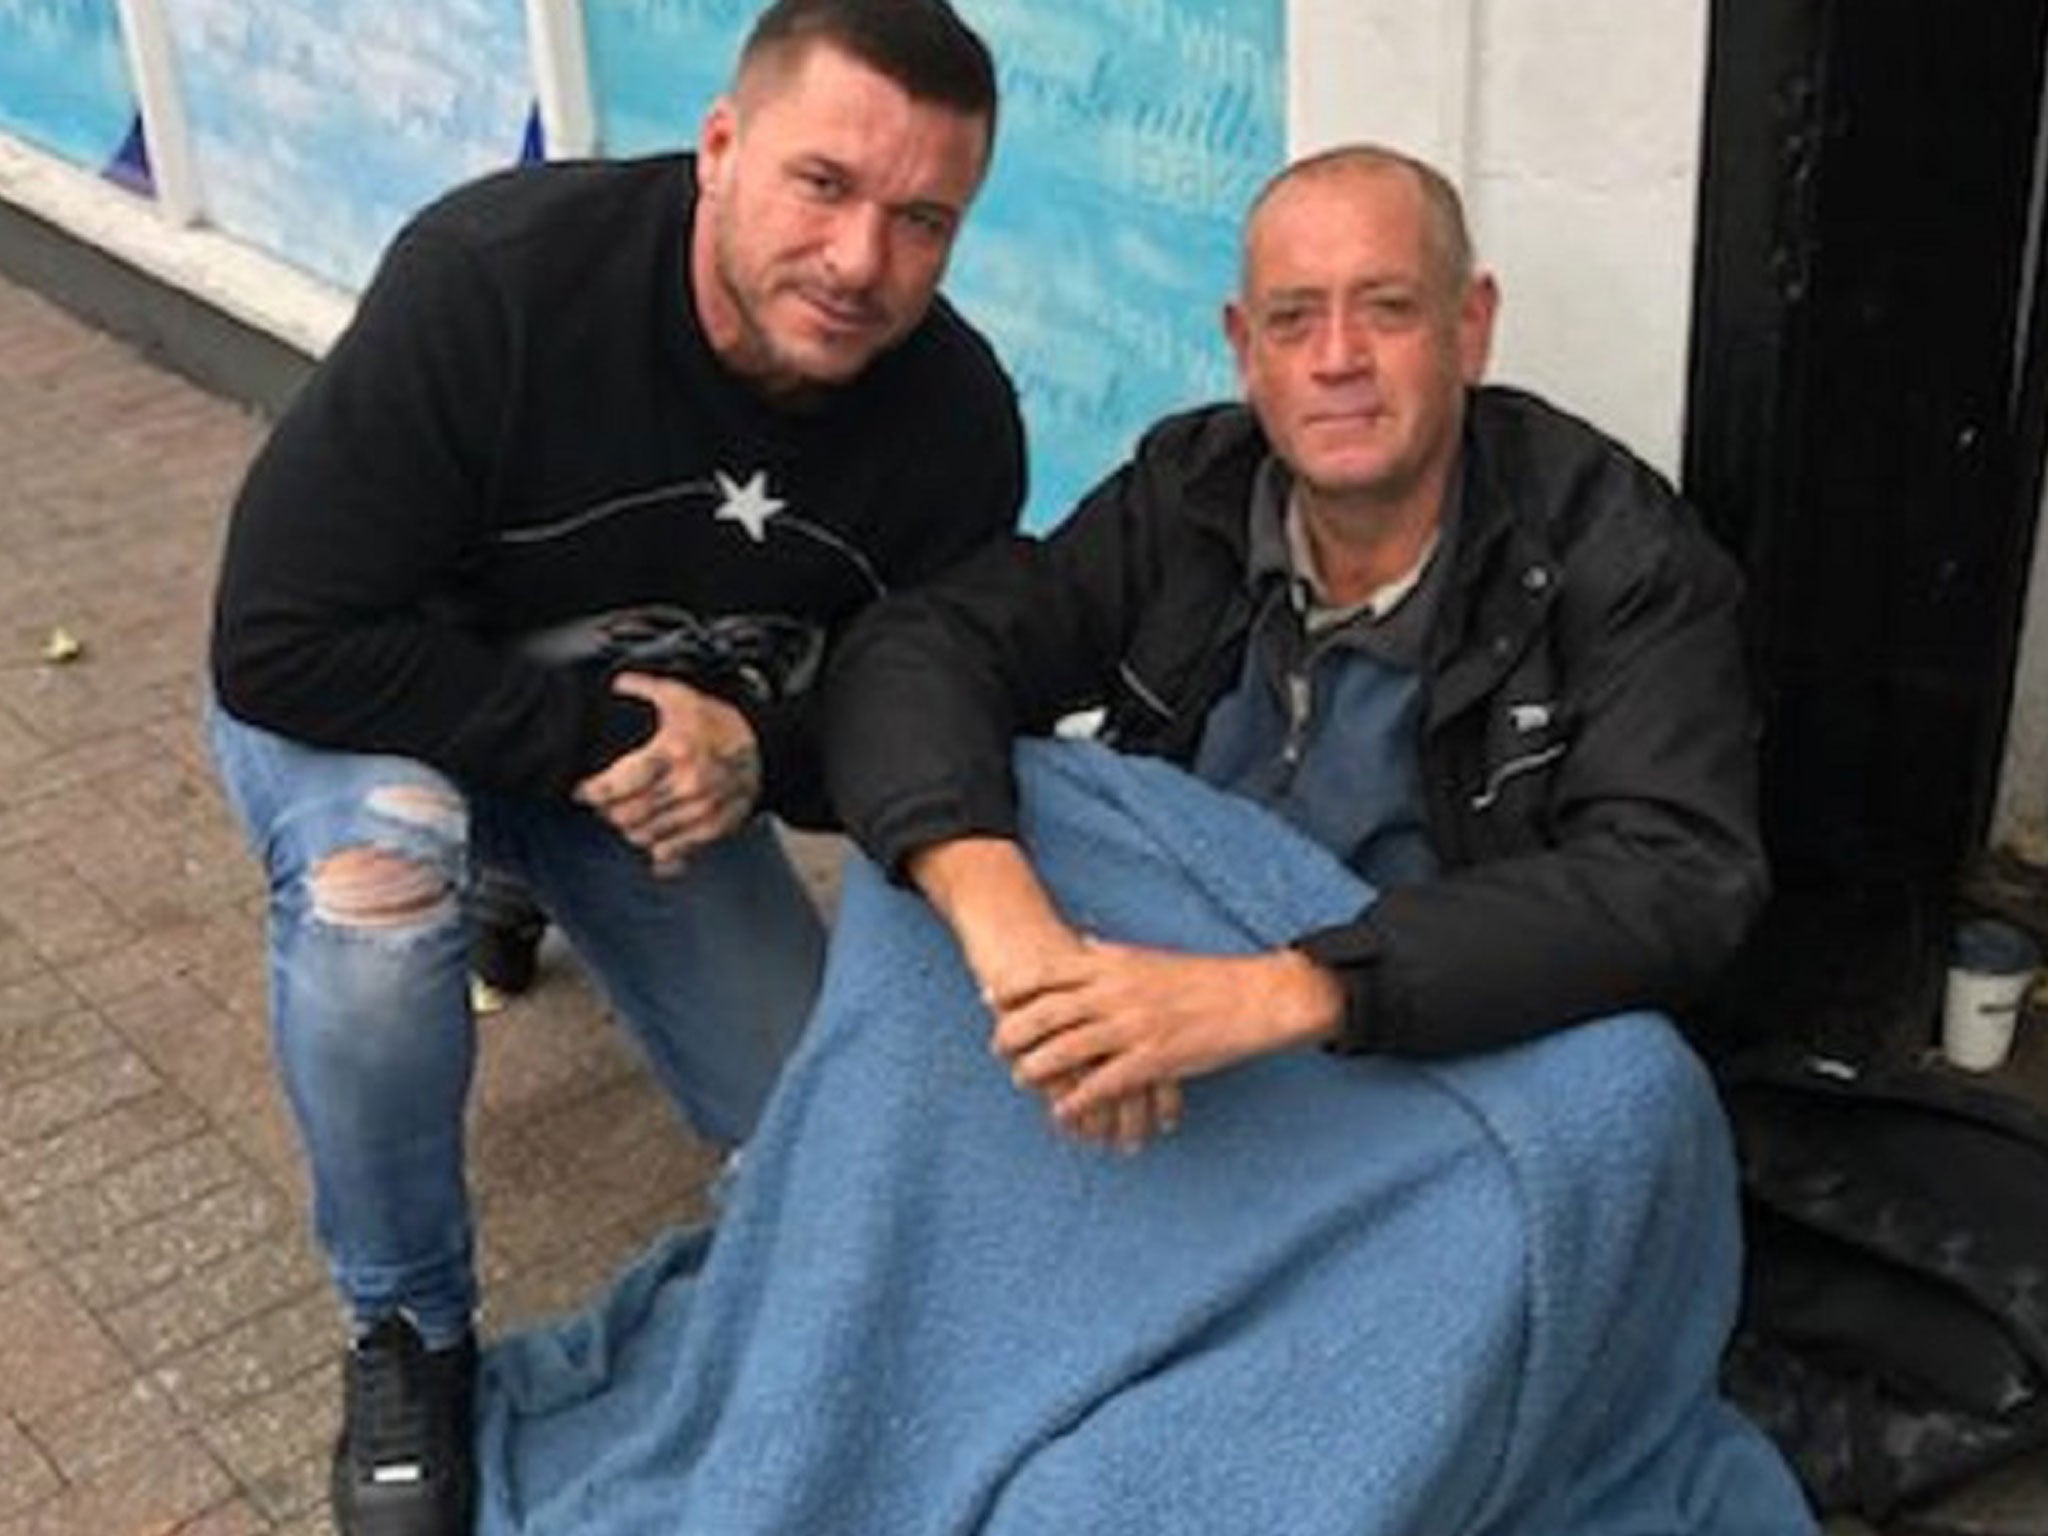 Billericay Town FC owner Glenn Tamplin offered the men security and caretaker jobs